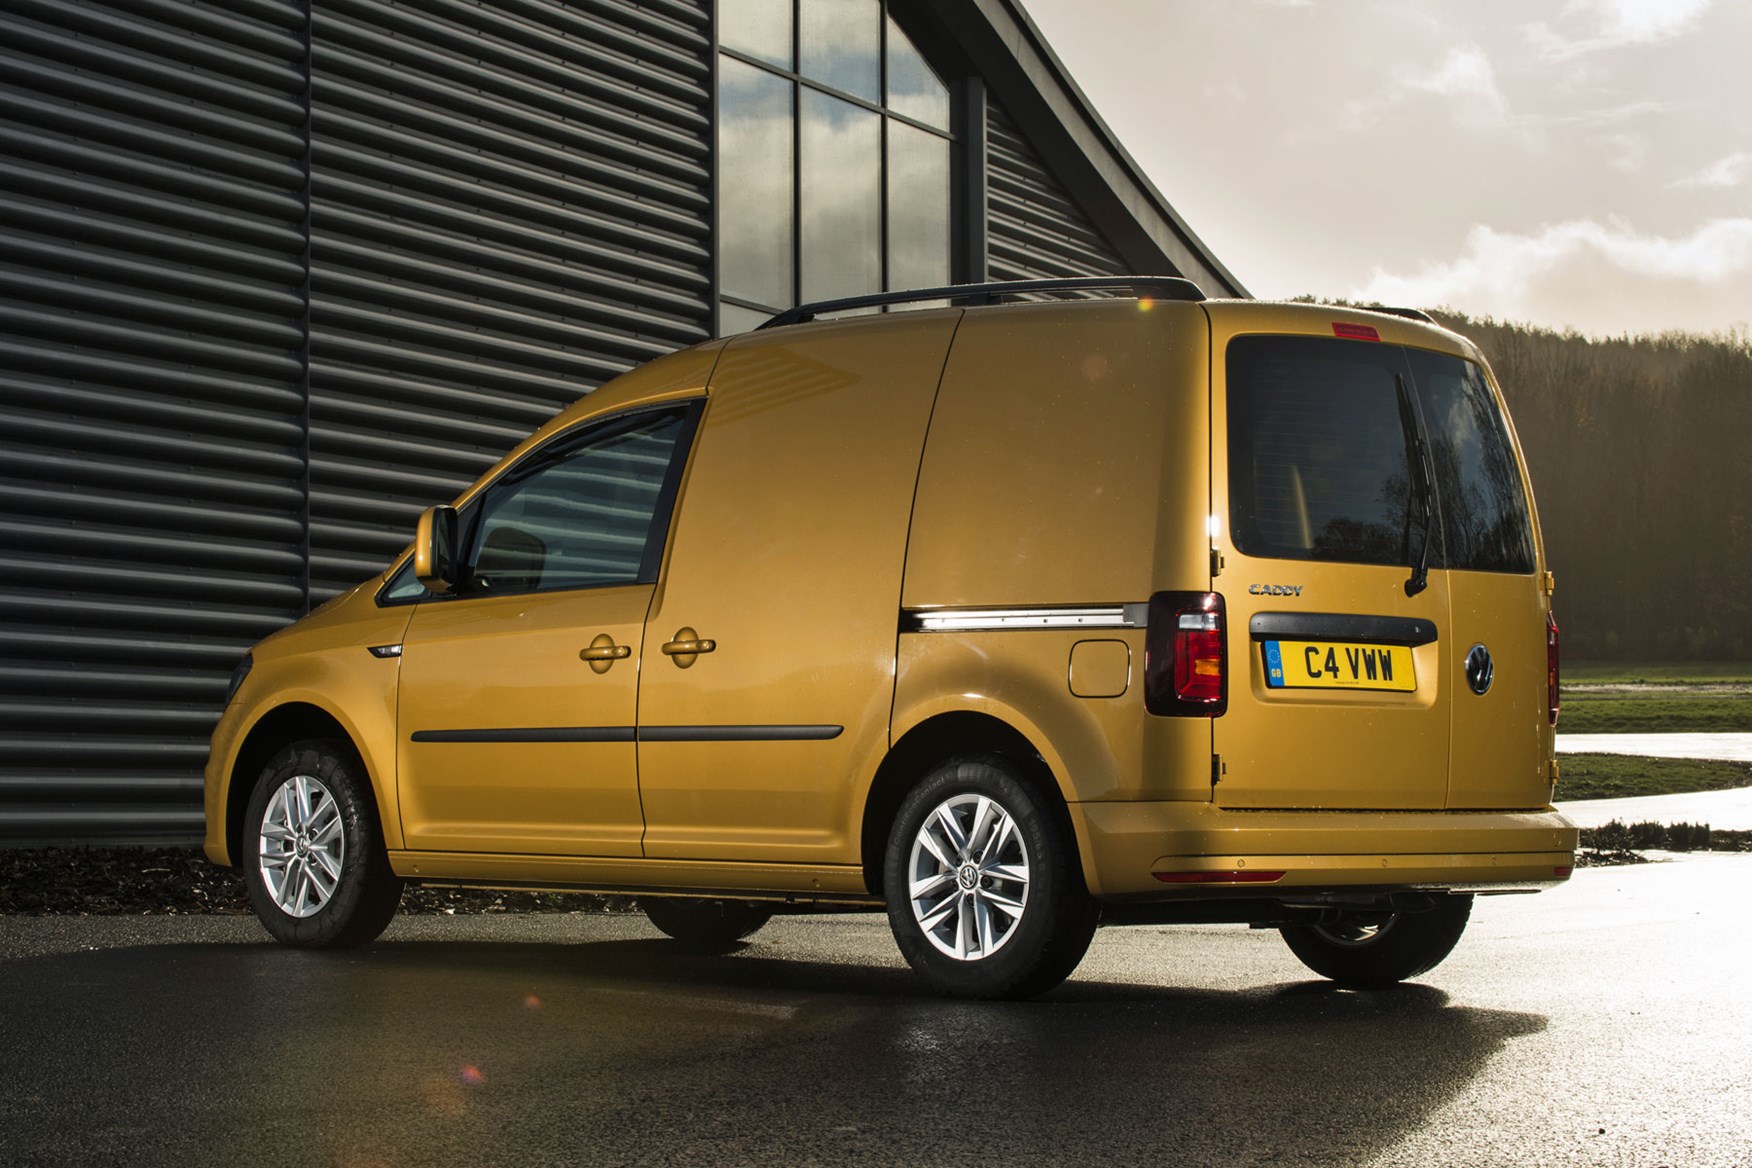 VW Caddy review - 2018 model, rear view, yellow